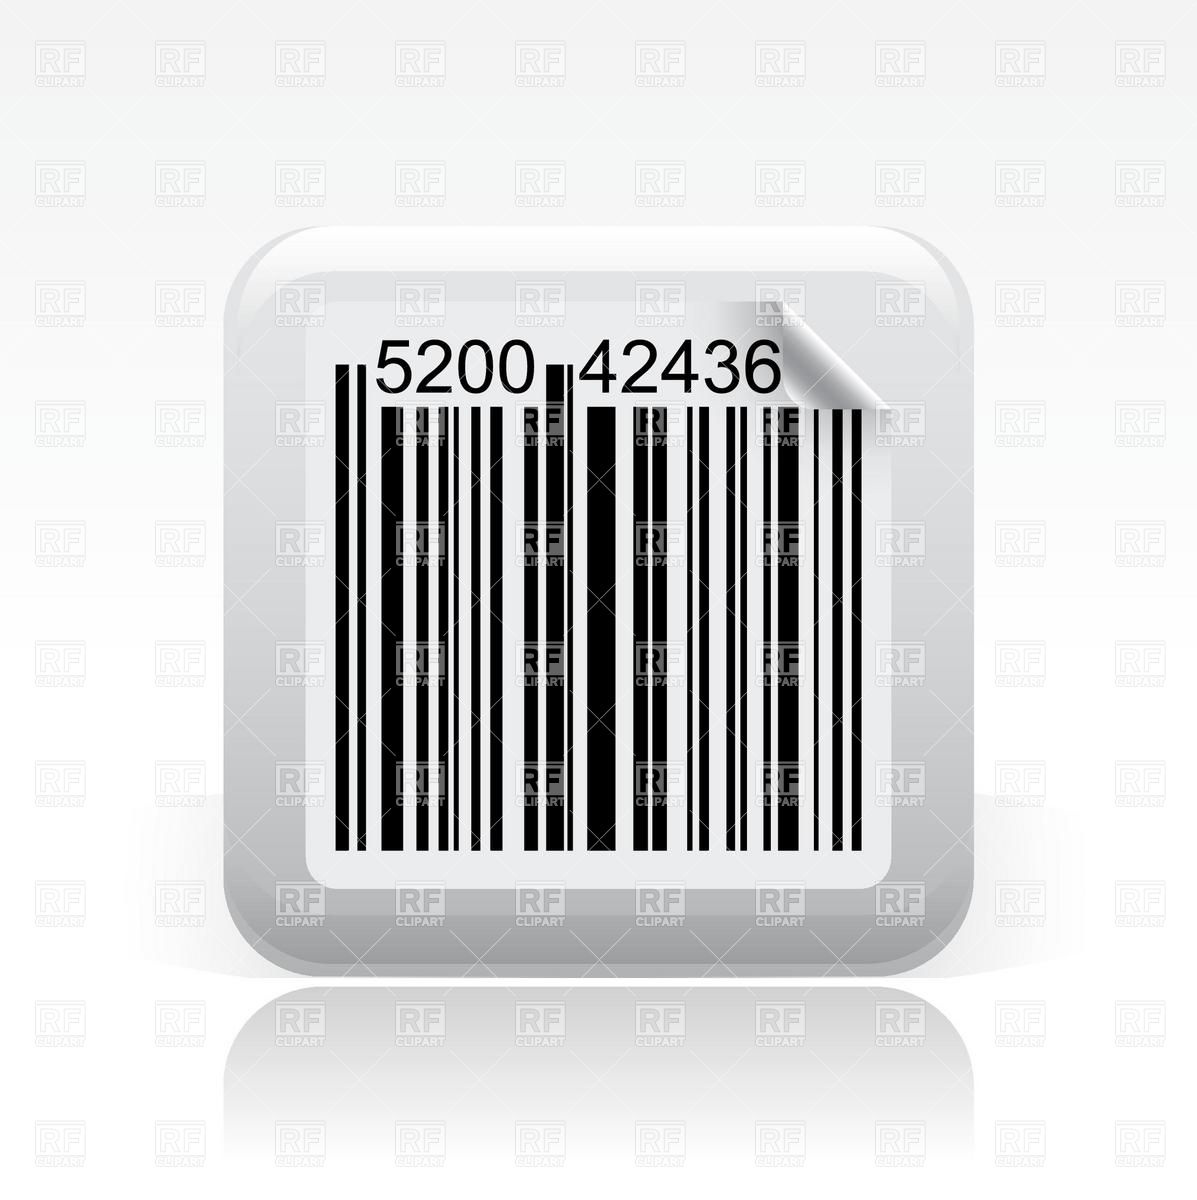 Barcode Single Icon Signs Symbols Maps Download Royalty Free    